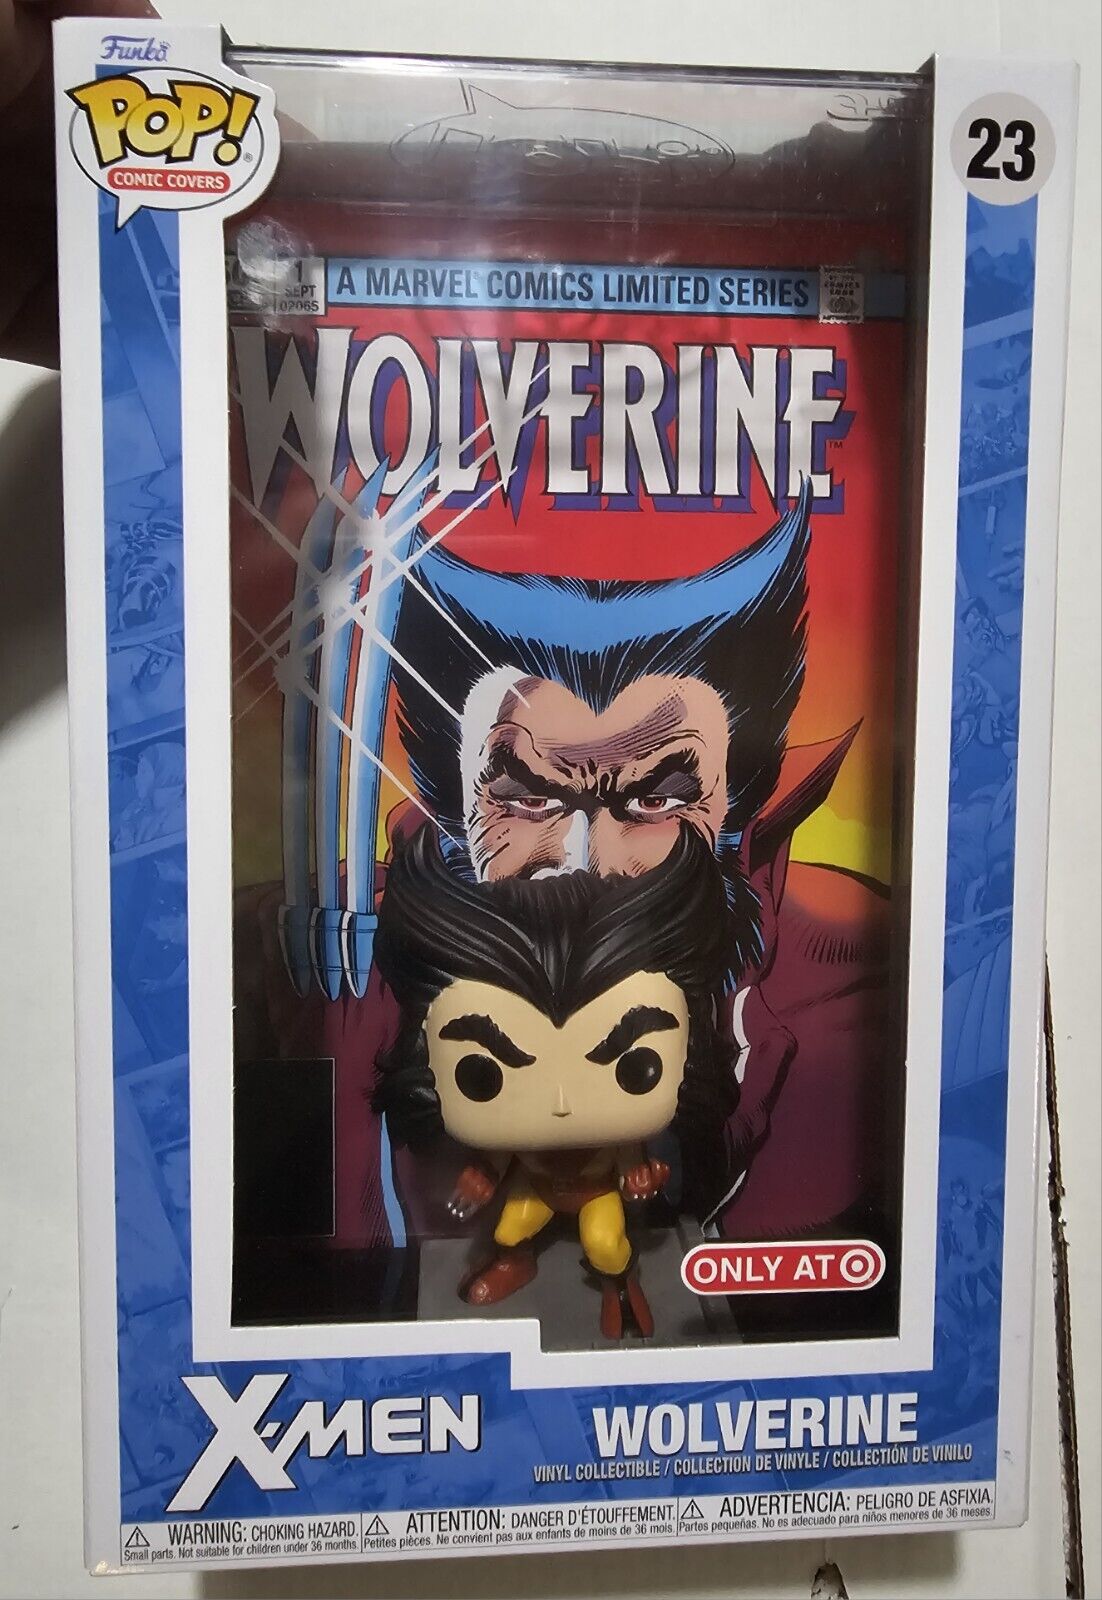 Wolverine #23 Funko Pop Comic Cover. Target Exclusive 